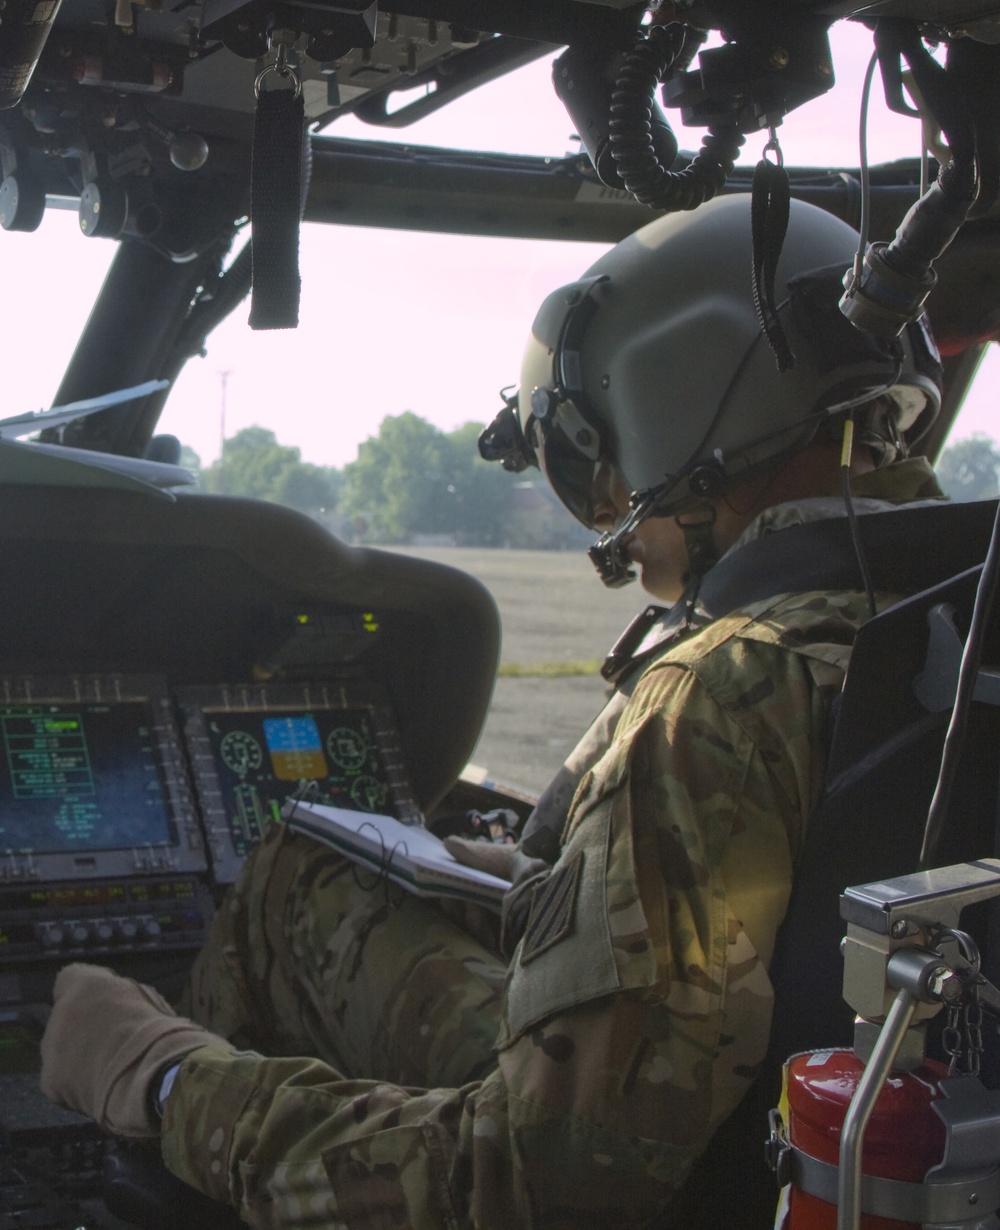 Taking back the skies: Black Hawks fly training mission in Lithuania